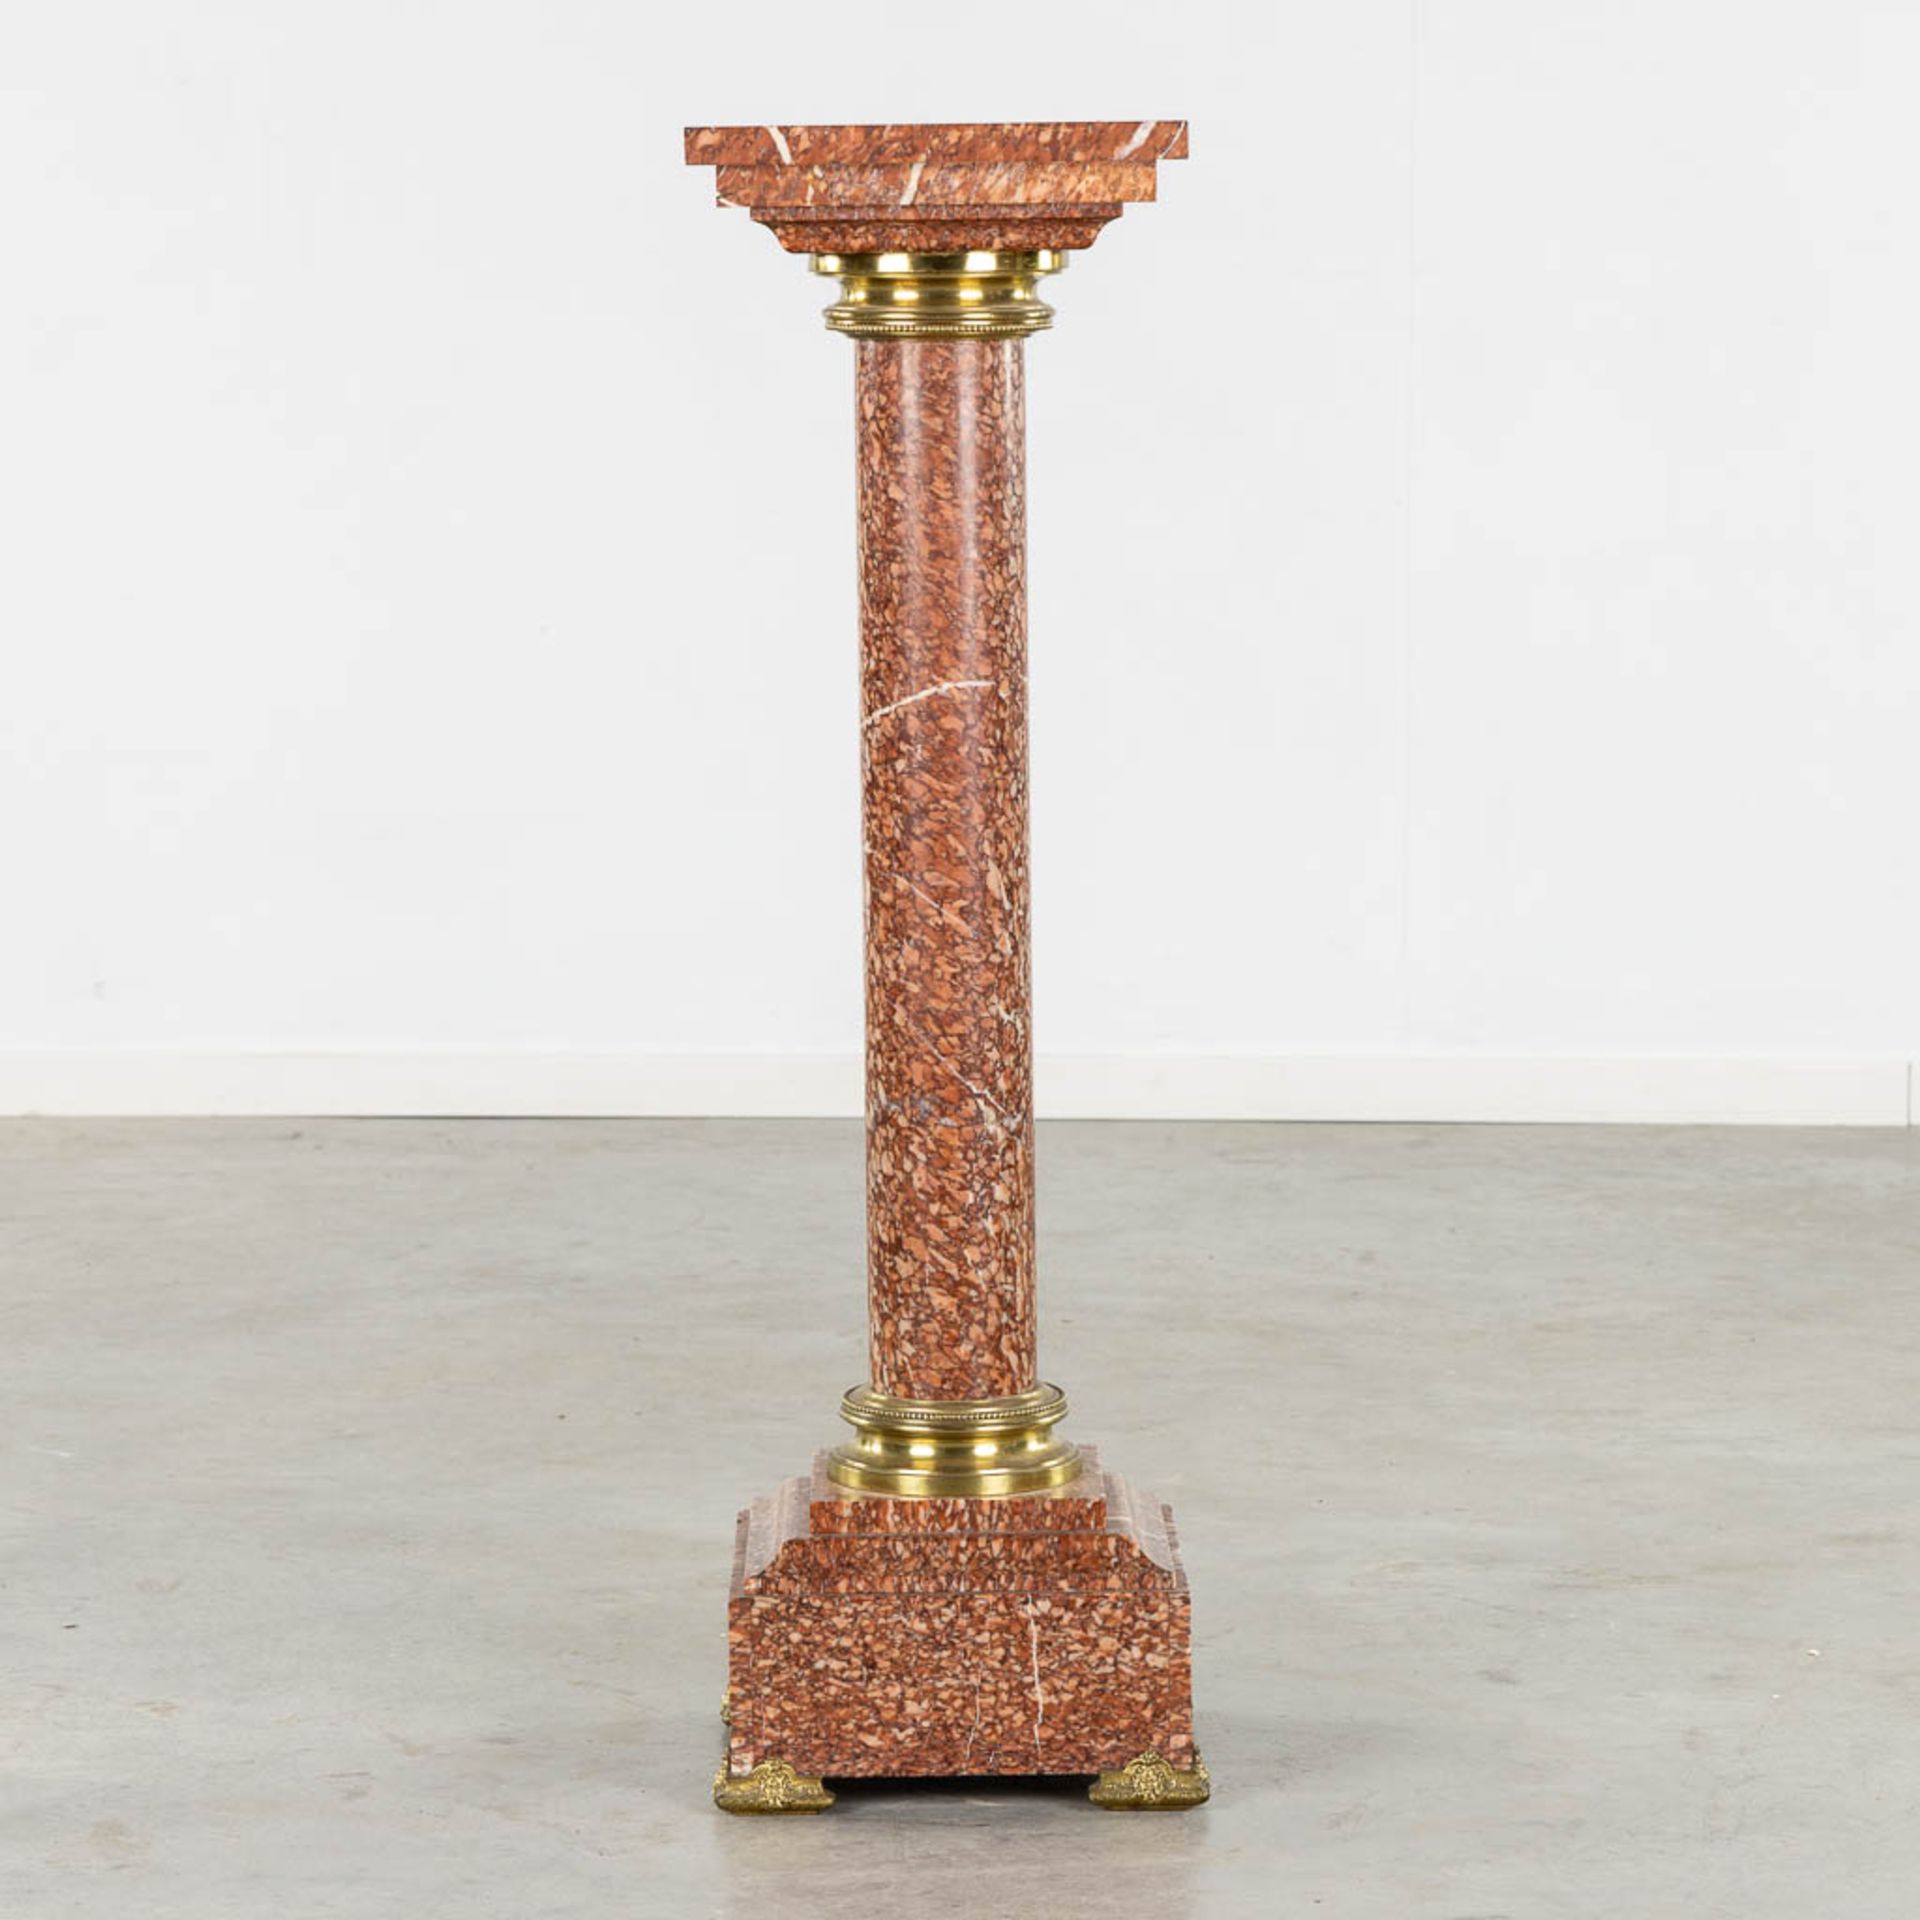 An antique sculptured red marble pedestal, mounted with bronze. Circa 1900. (L:30 x W:30 x H:103 cm) - Image 3 of 7